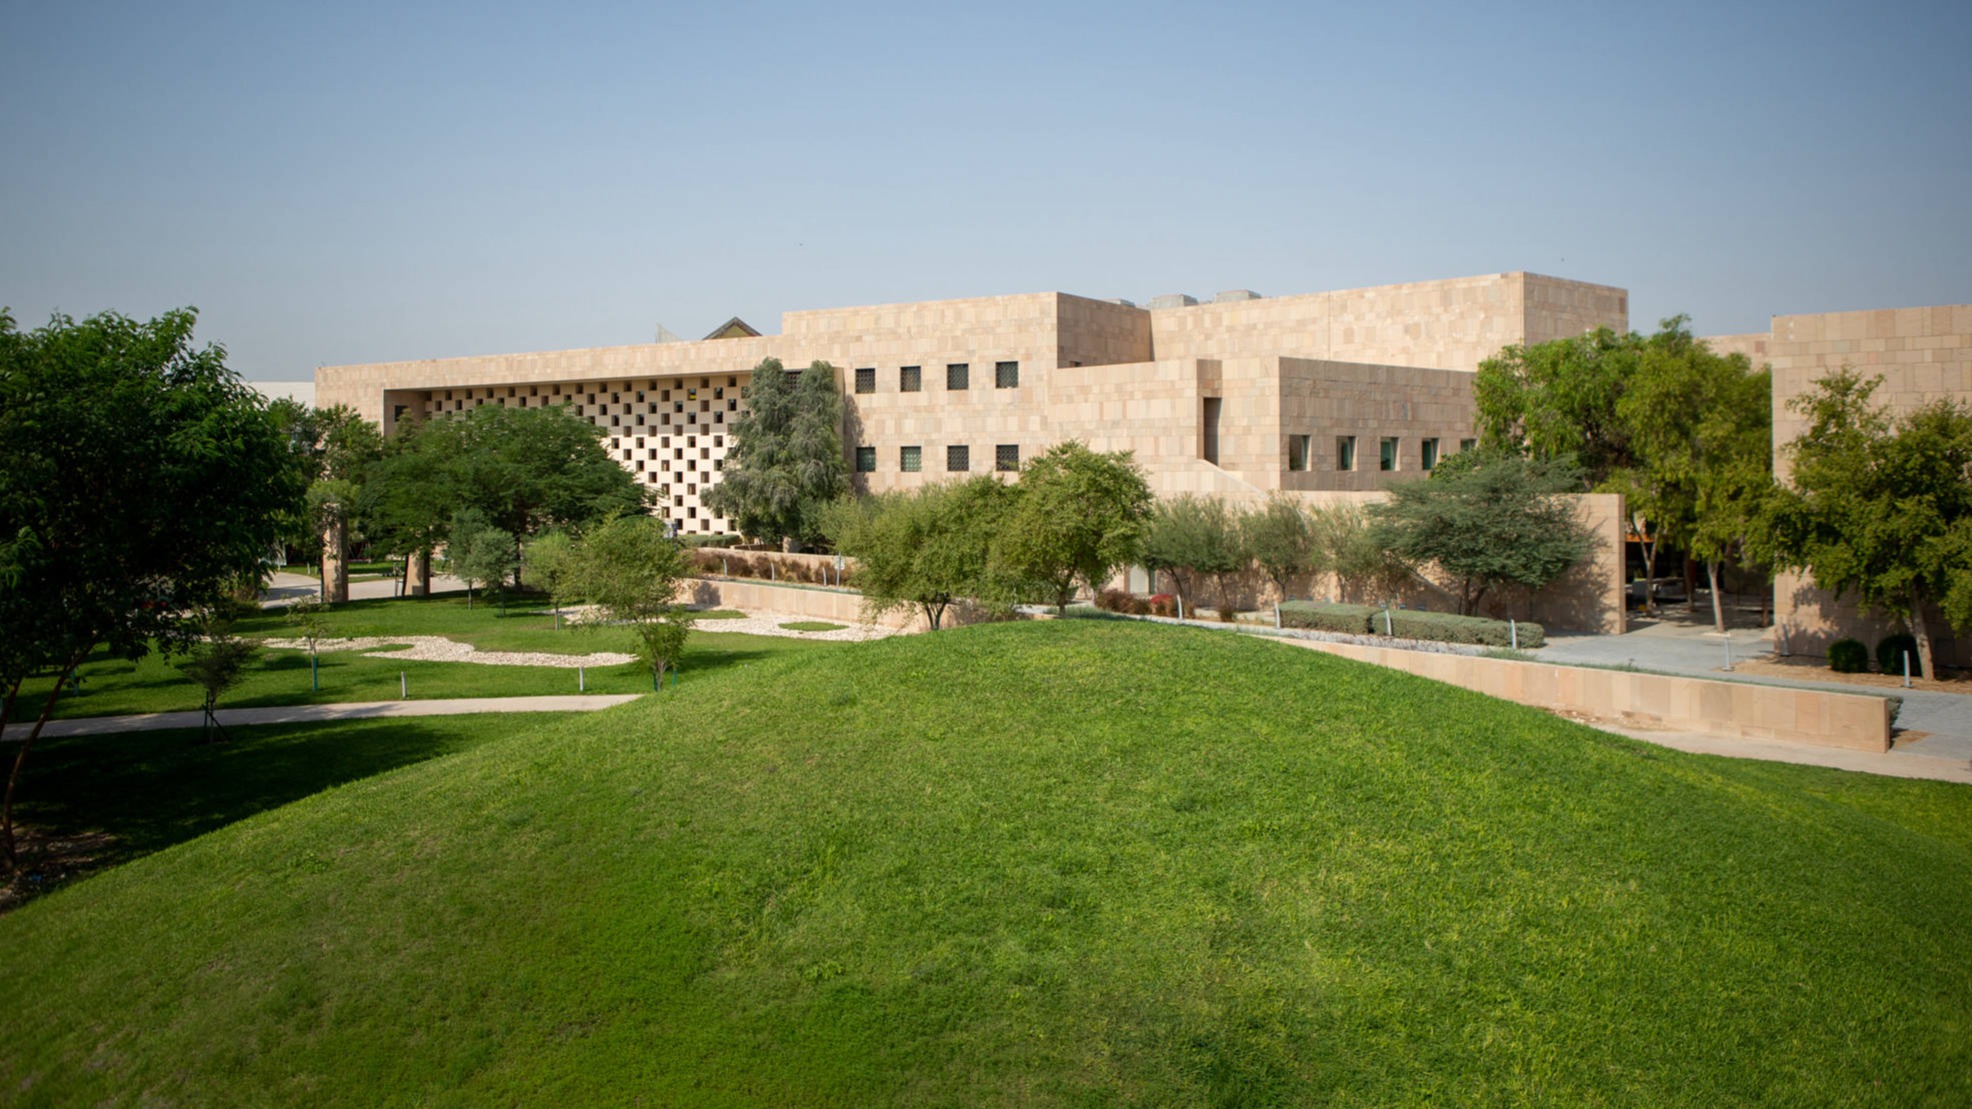 Exterior view of Georgetown University in Qatar showing green grassy hills and trees surrounding the building